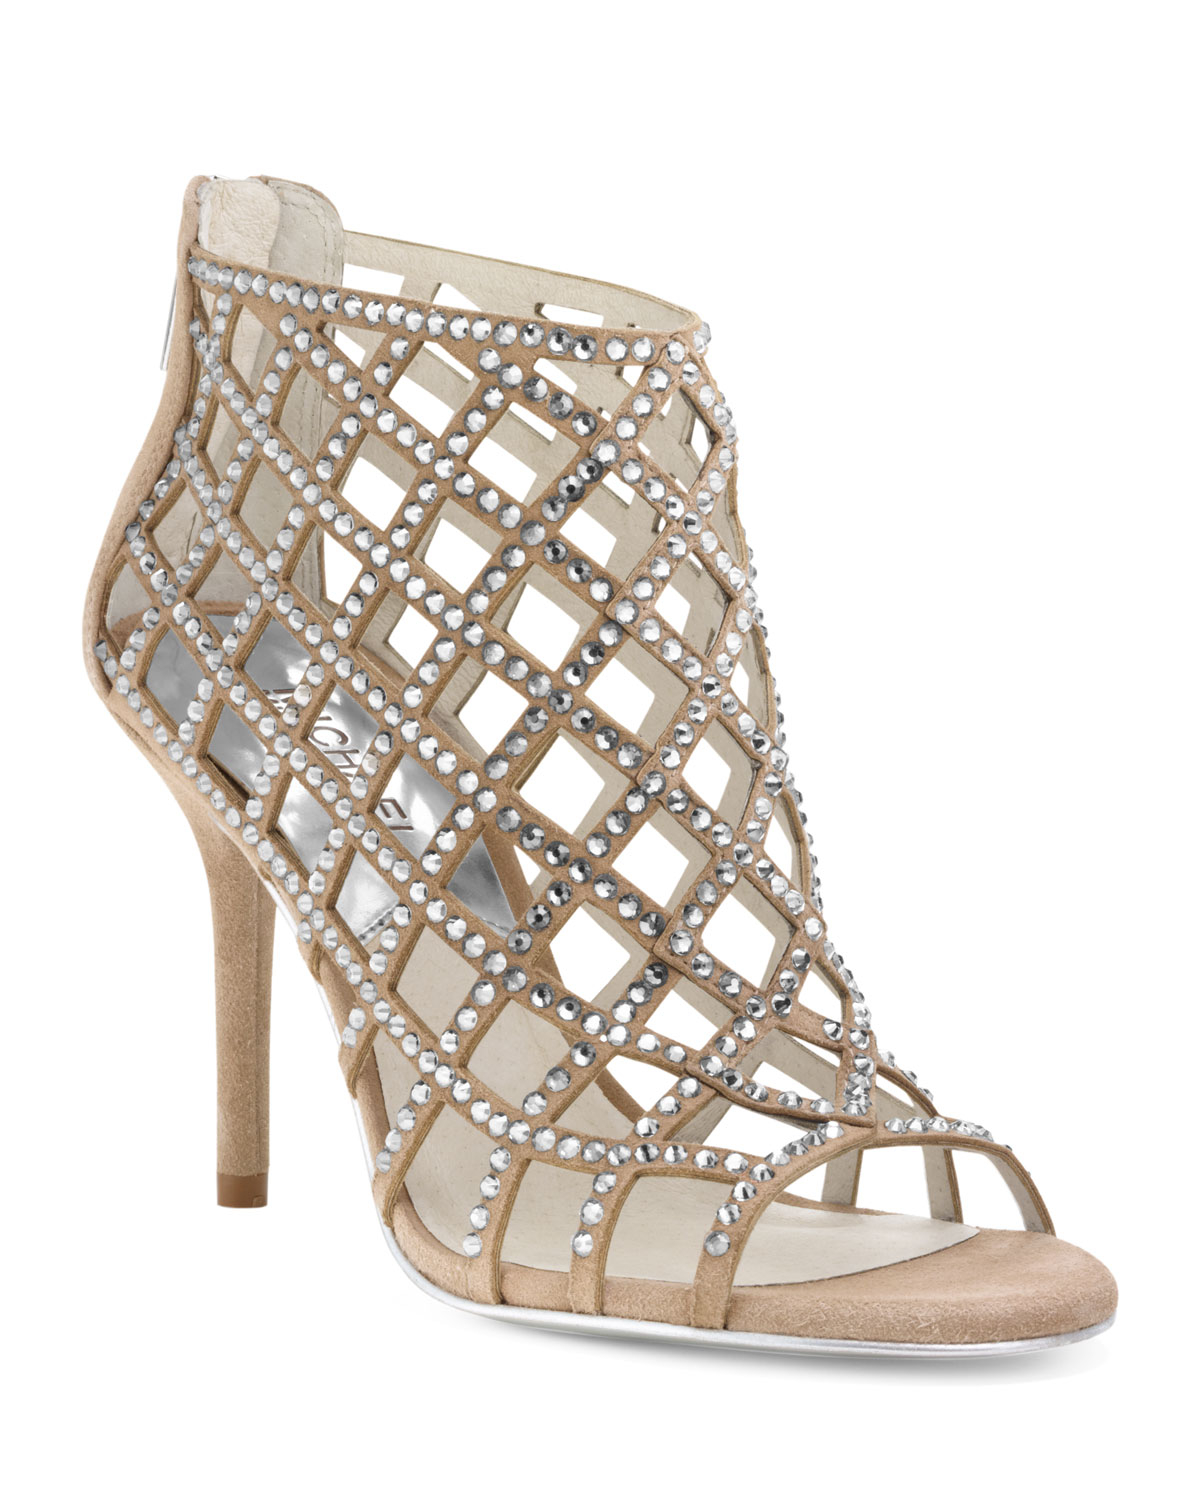 Michael Kors Yvonne Crystallized Cage Bootie in Khaki 